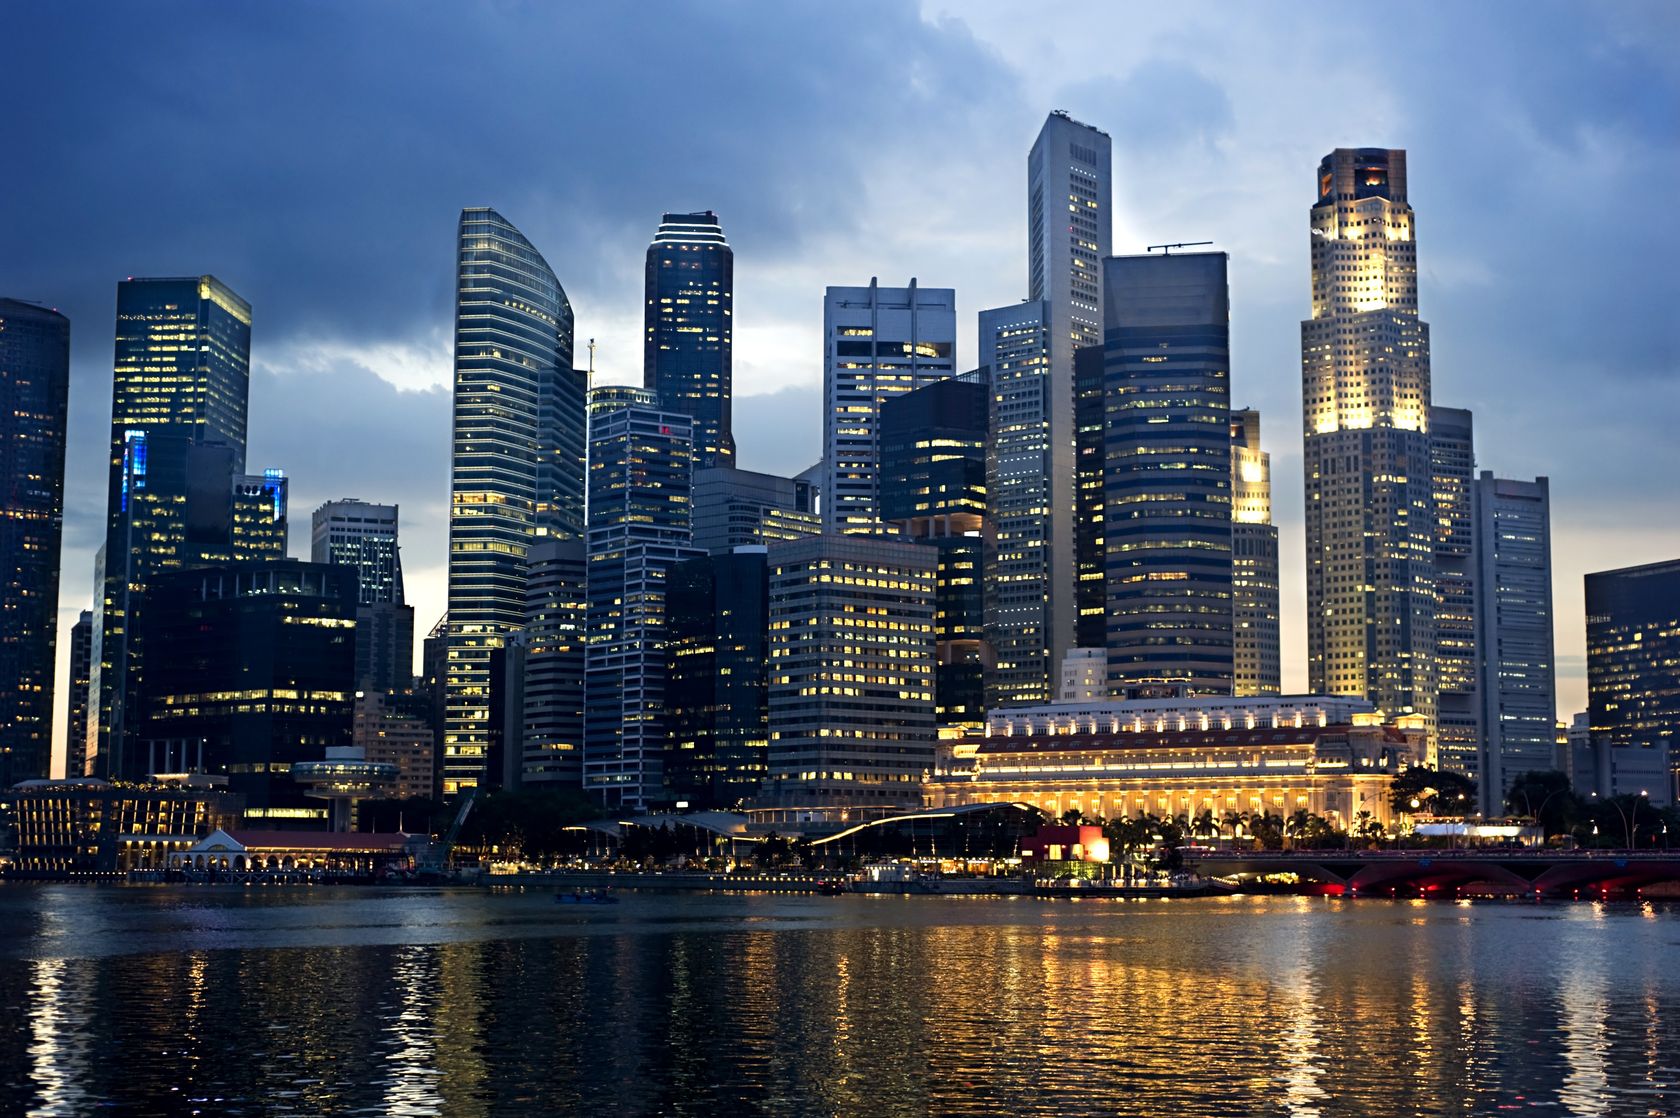 New Grant Scheme Will Let Insurers Recover Costs From Issuing Catastrophe Bonds In Singapore.